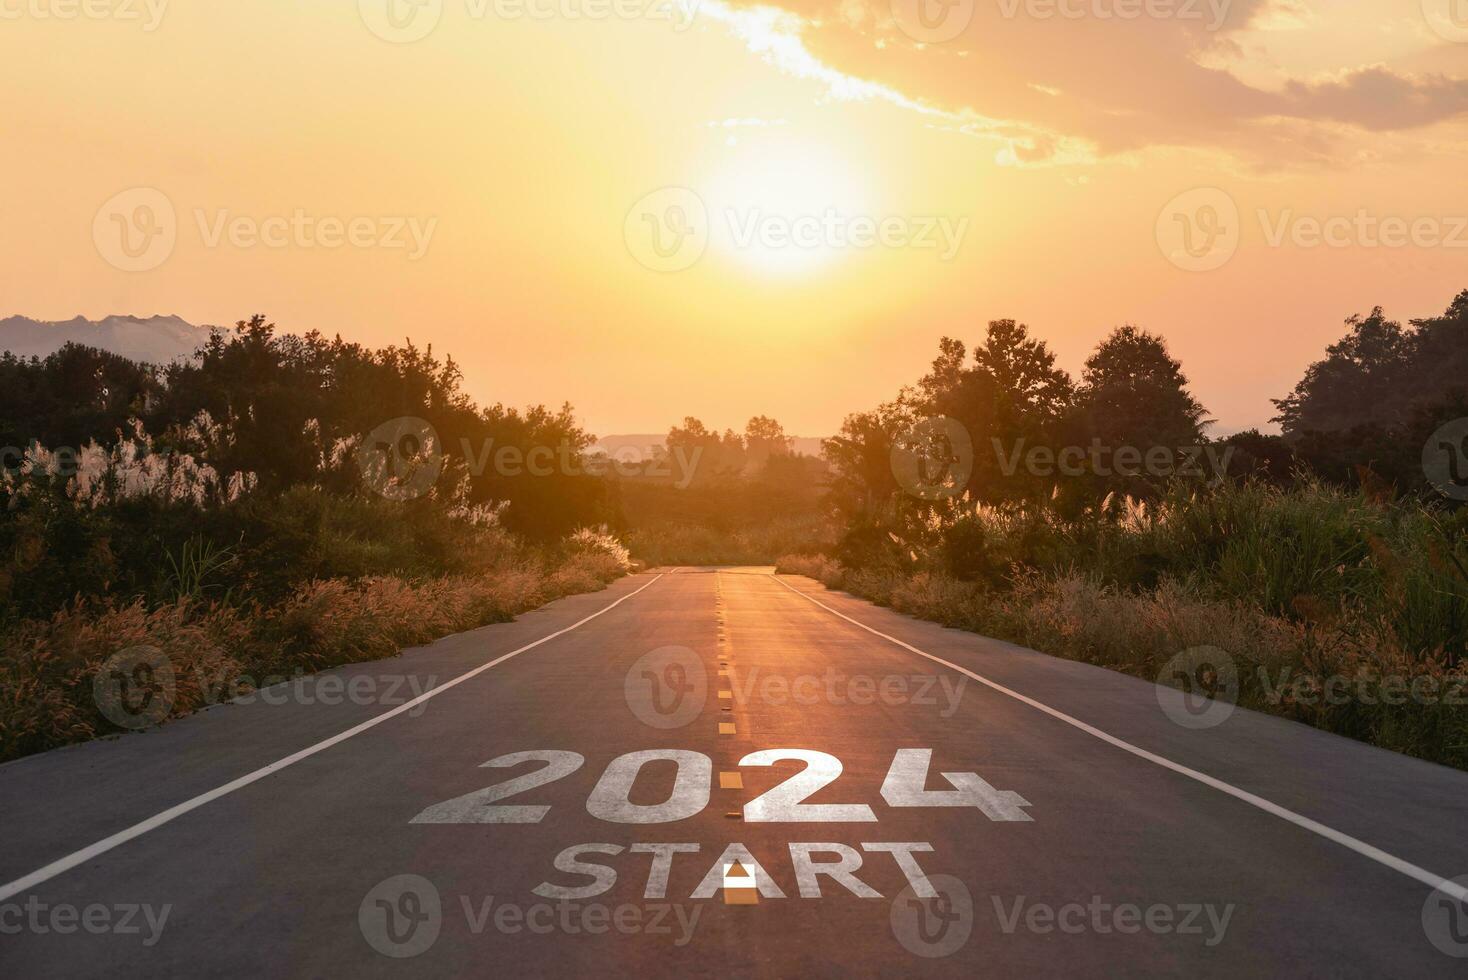 Happy new year 2024,2024 symbolizes the start of the new year. The letter start new year 2024 on the road in the nature route roadway sunset tree environment ecology or greenery wallpaper concept. photo